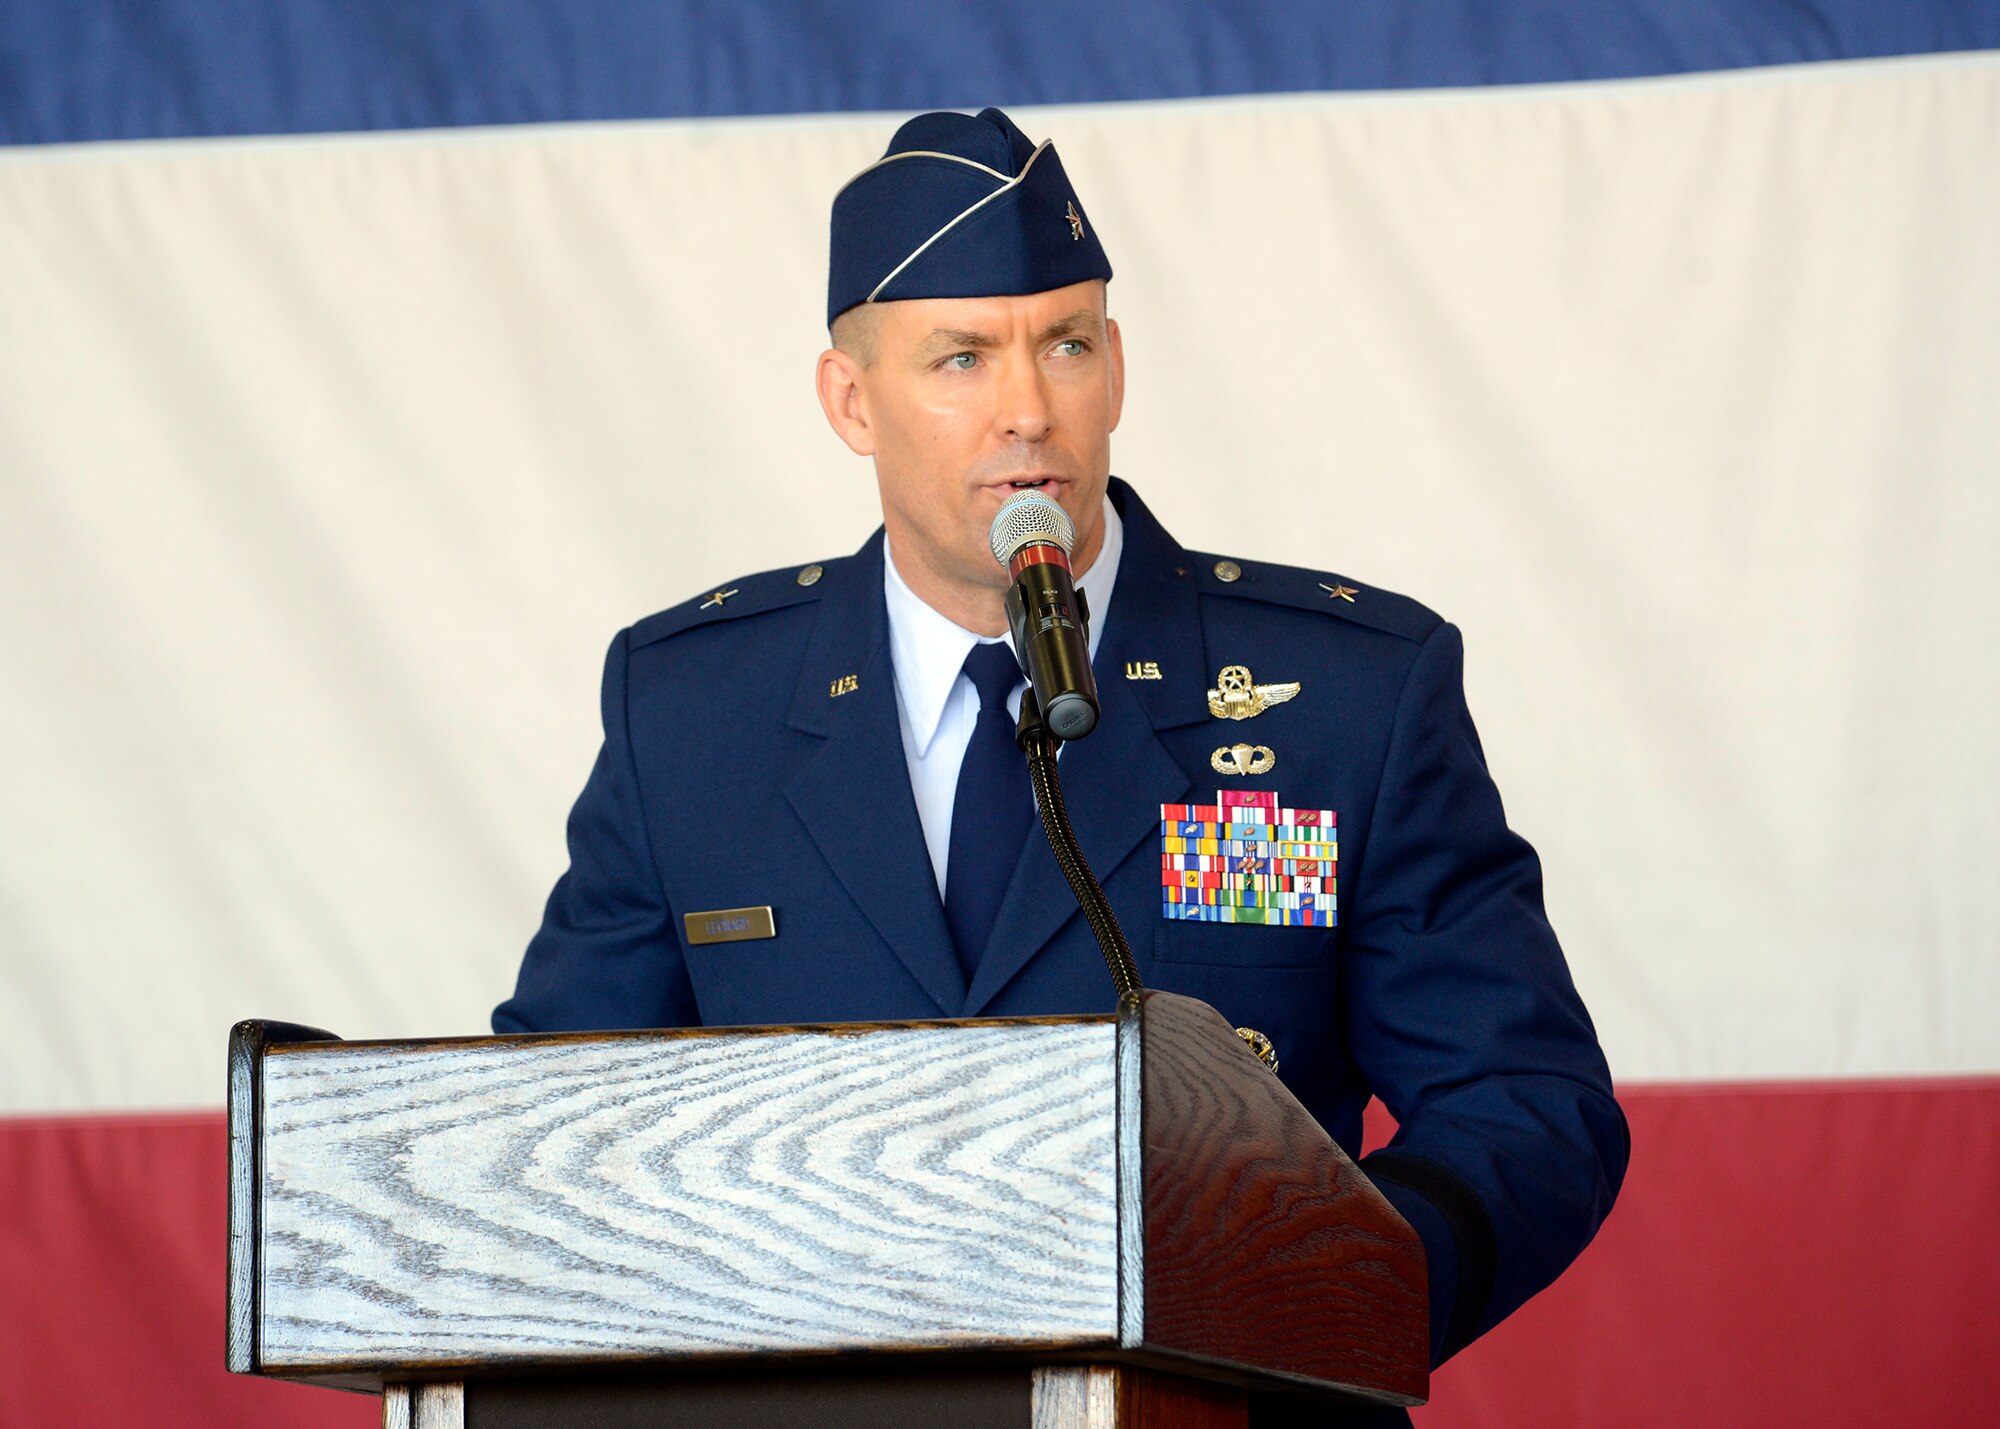 Brig. Gen. Brook Leonard, 56th Fighter Wing commander, speaks to the airmen for the first time during the 56th Fighter Wing Change of Command ceremony July 13, 2016 at Luke Air Force Base, Ariz. (U.S. Air Force photo by Senior Airman Devante Williams)